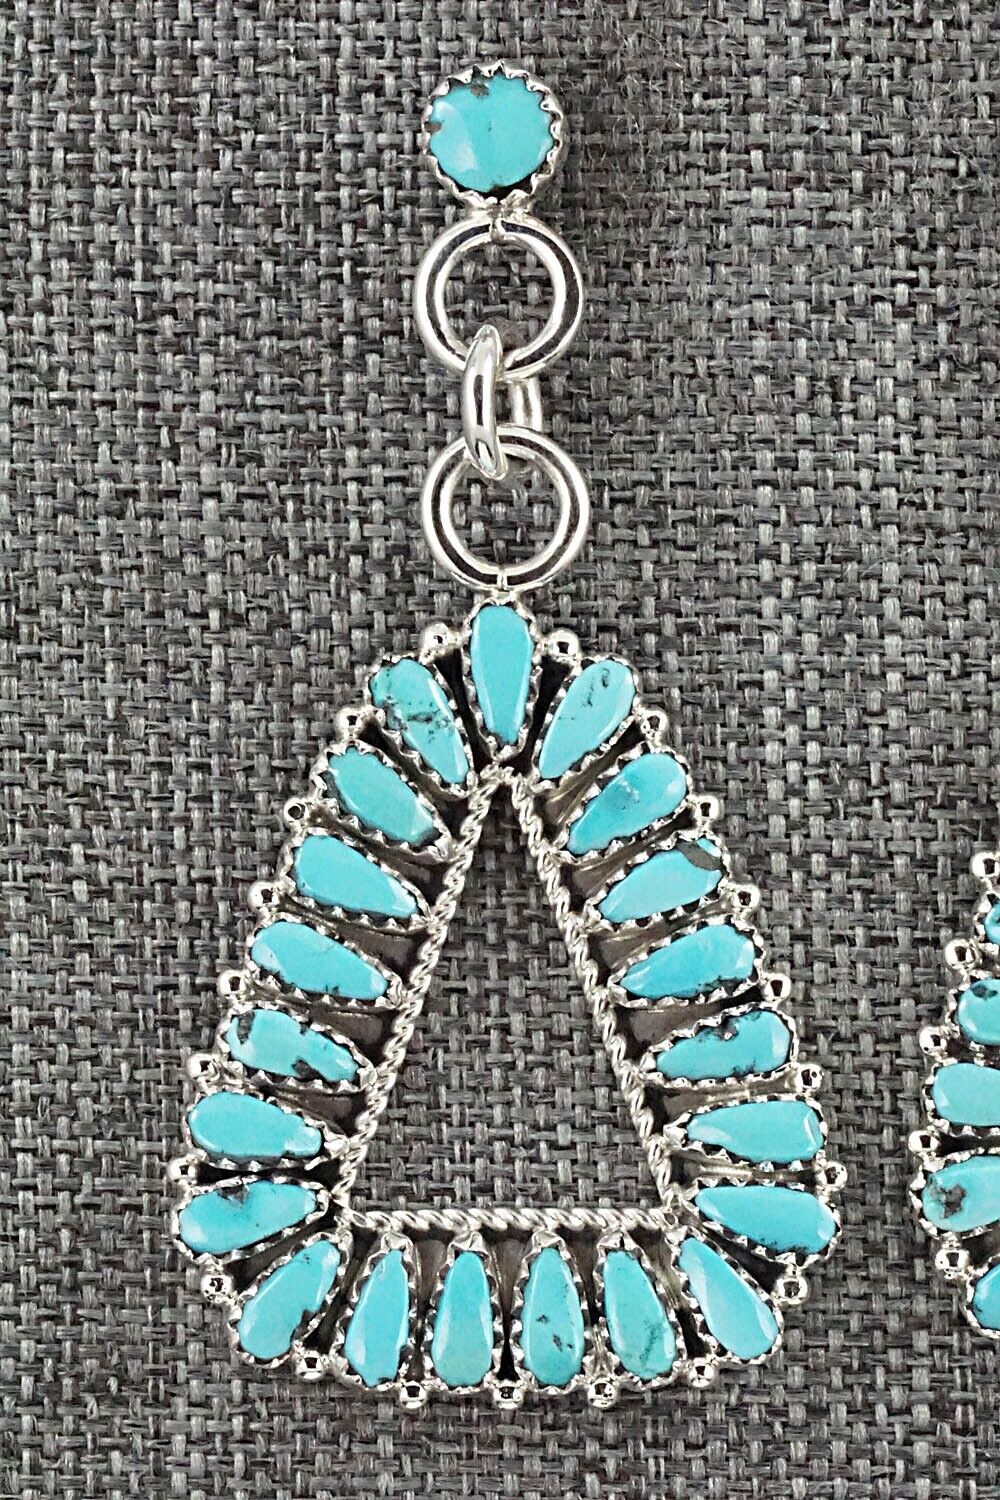 Turquoise & Sterling Silver Earrings - Sarphine Wilson